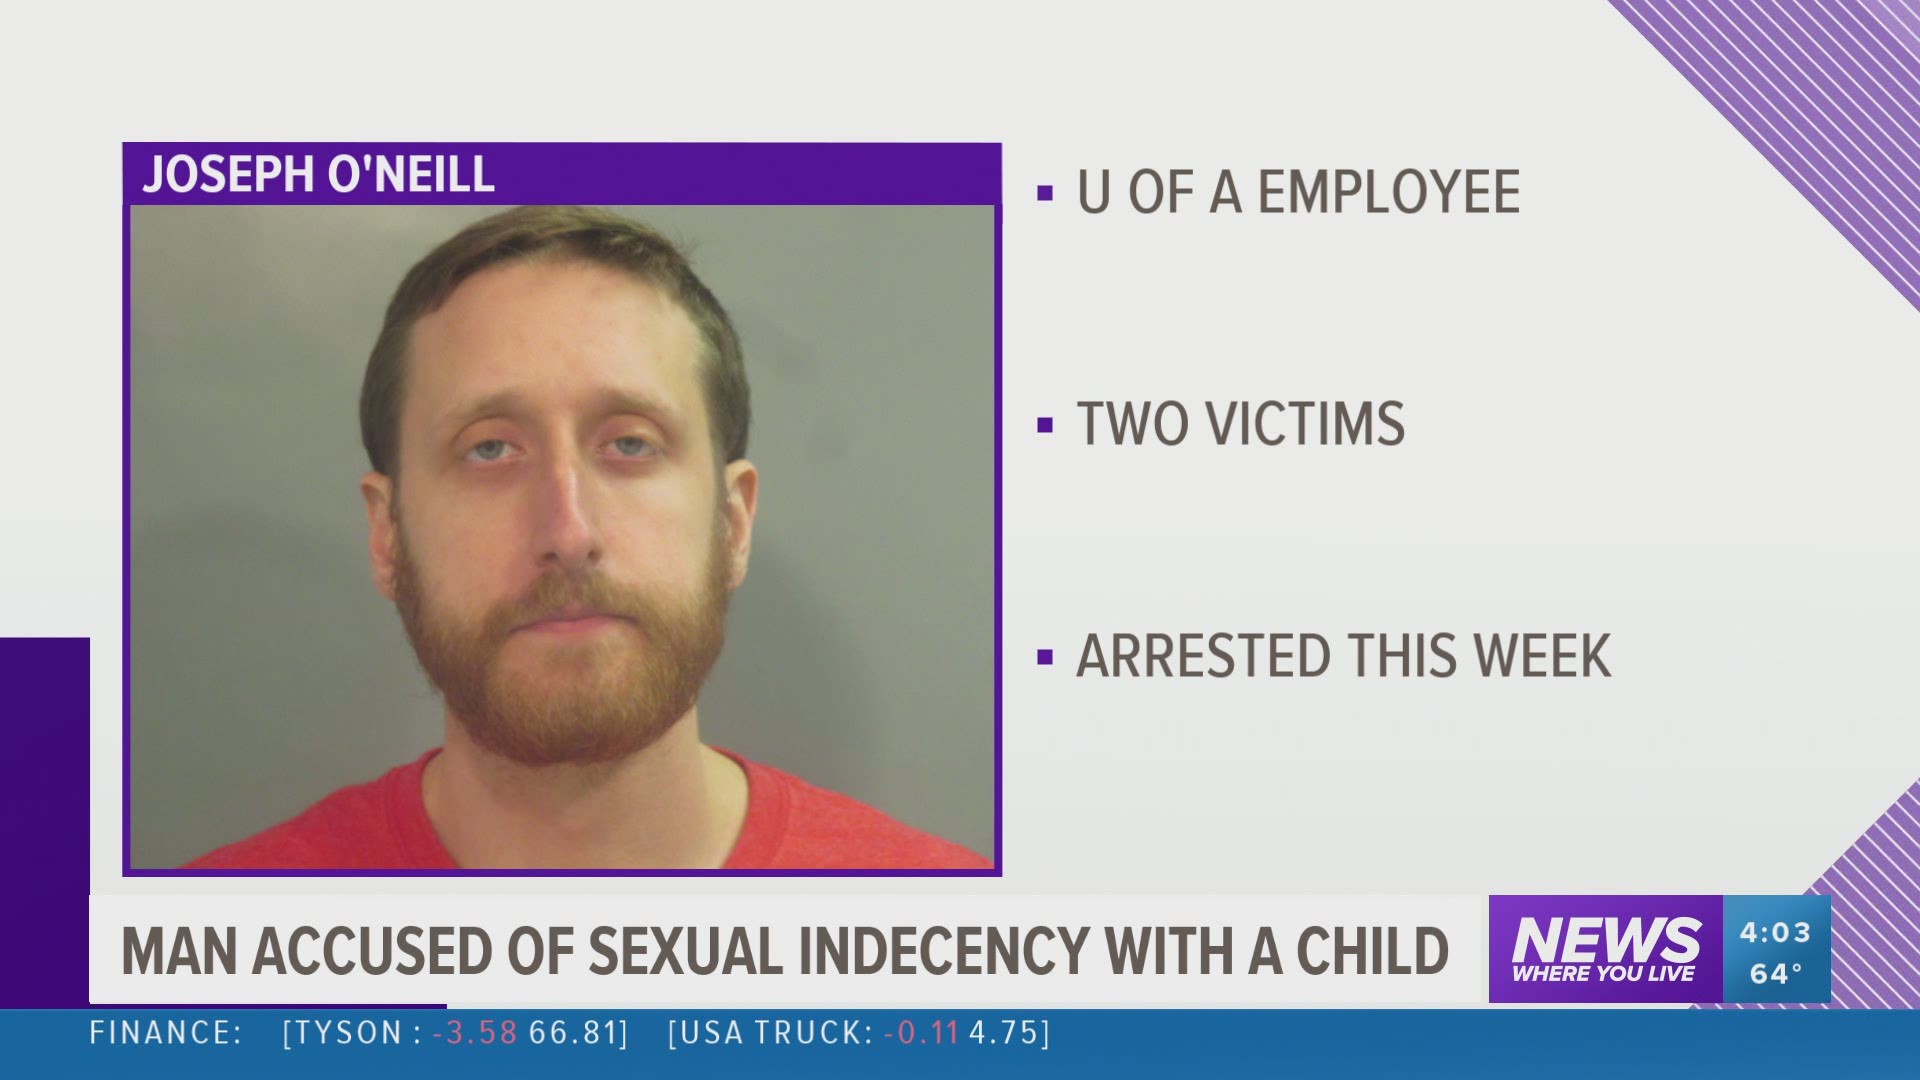 UA employee accused of sexual indecency with a child